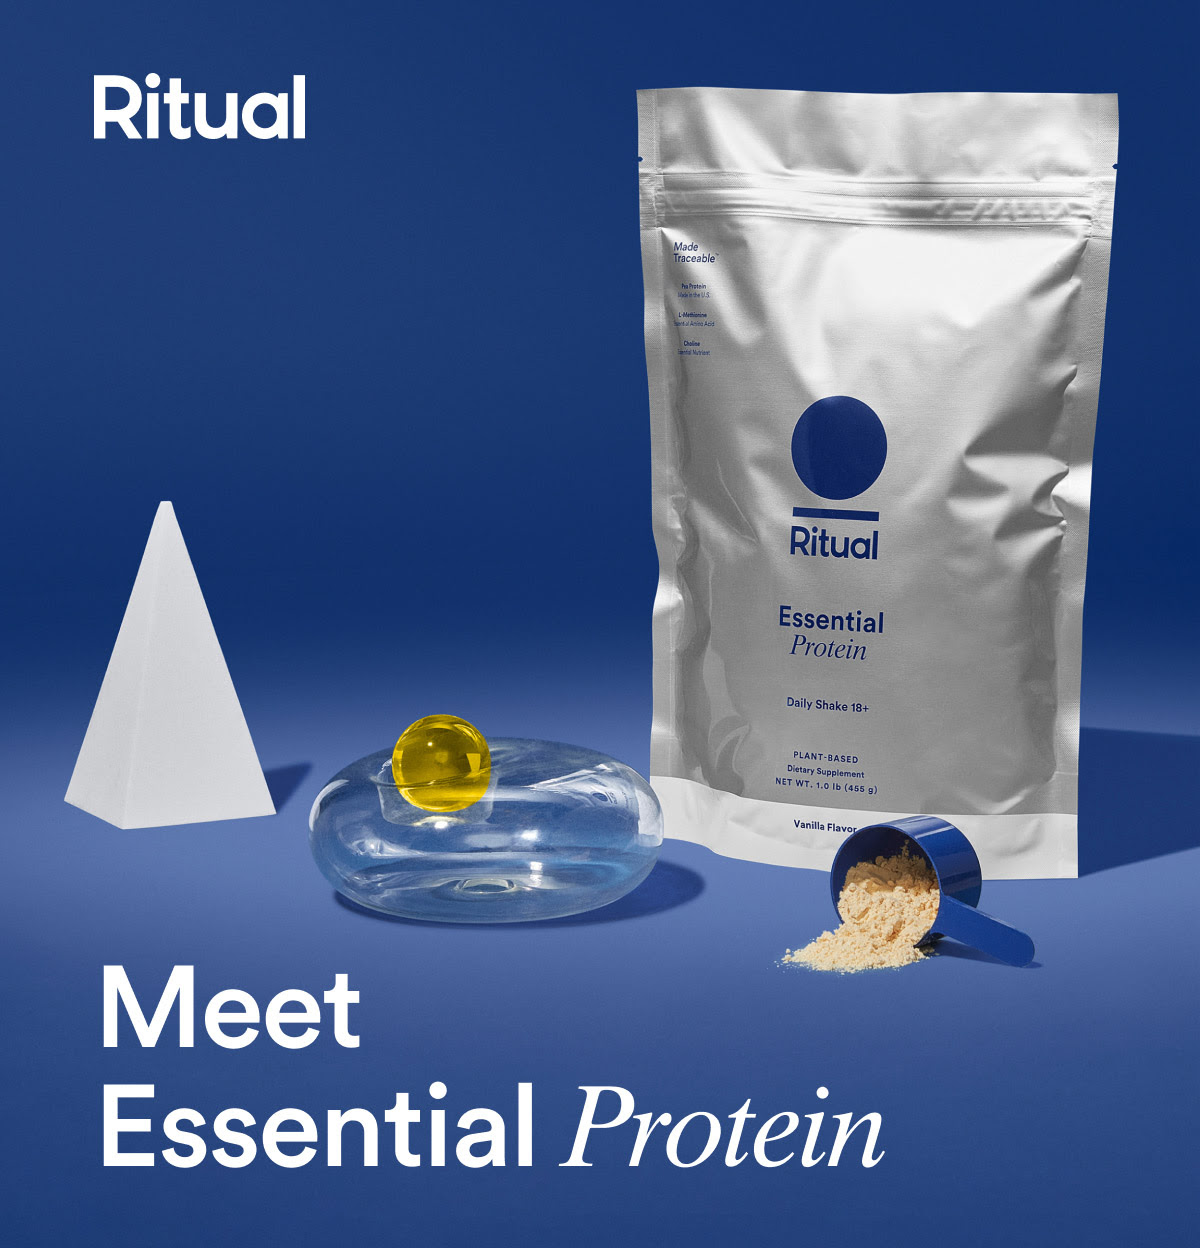 Ritual: Get a Free Shaker with First Essential Protein Purchase